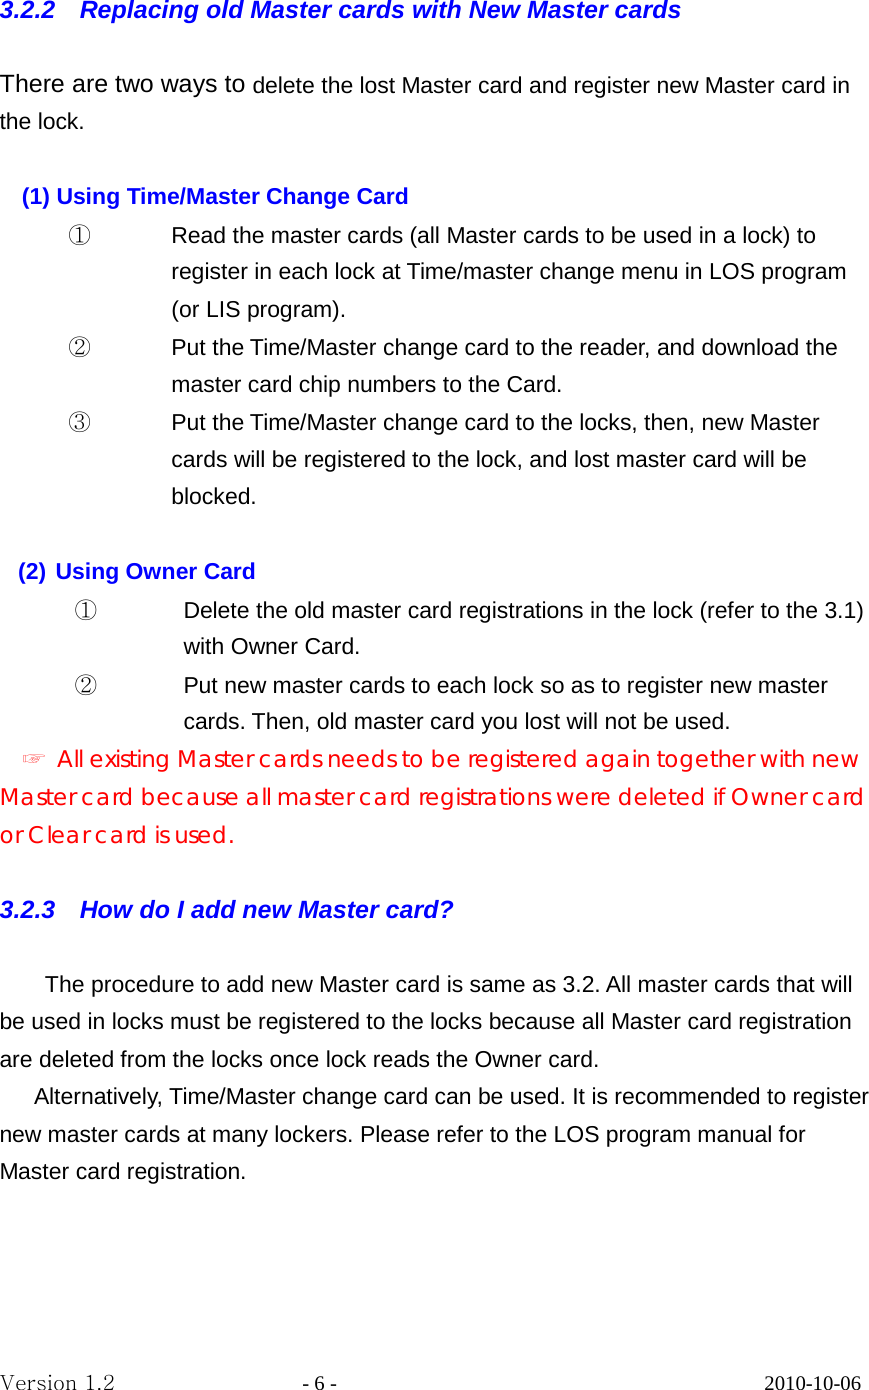  3.2.2    Replacing old Master cards with New Master cards  There are two ways to delete the lost Master card and register new Master card in the lock.  (1) Using Time/Master Change Card ① Read the master cards (all Master cards to be used in a lock) to register in each lock at Time/master change menu in LOS program (or LIS program). ② Put the Time/Master change card to the reader, and download the master card chip numbers to the Card.   ③ Put the Time/Master change card to the locks, then, new Master cards will be registered to the lock, and lost master card will be blocked.    (2) Using Owner Card   ① Delete the old master card registrations in the lock (refer to the 3.1) with Owner Card. ② Put new master cards to each lock so as to register new master cards. Then, old master card you lost will not be used. ☞ All existing Master cards needs to be registered again together with new Master card because all master card registrations were deleted if Owner card or Clear card is used.  3.2.3    How do I add new Master card?      The procedure to add new Master card is same as 3.2. All master cards that will be used in locks must be registered to the locks because all Master card registration are deleted from the locks once lock reads the Owner card.    Alternatively, Time/Master change card can be used. It is recommended to register new master cards at many lockers. Please refer to the LOS program manual for Master card registration.   Version 1.2                  - 6 -                                         2010-10-06 